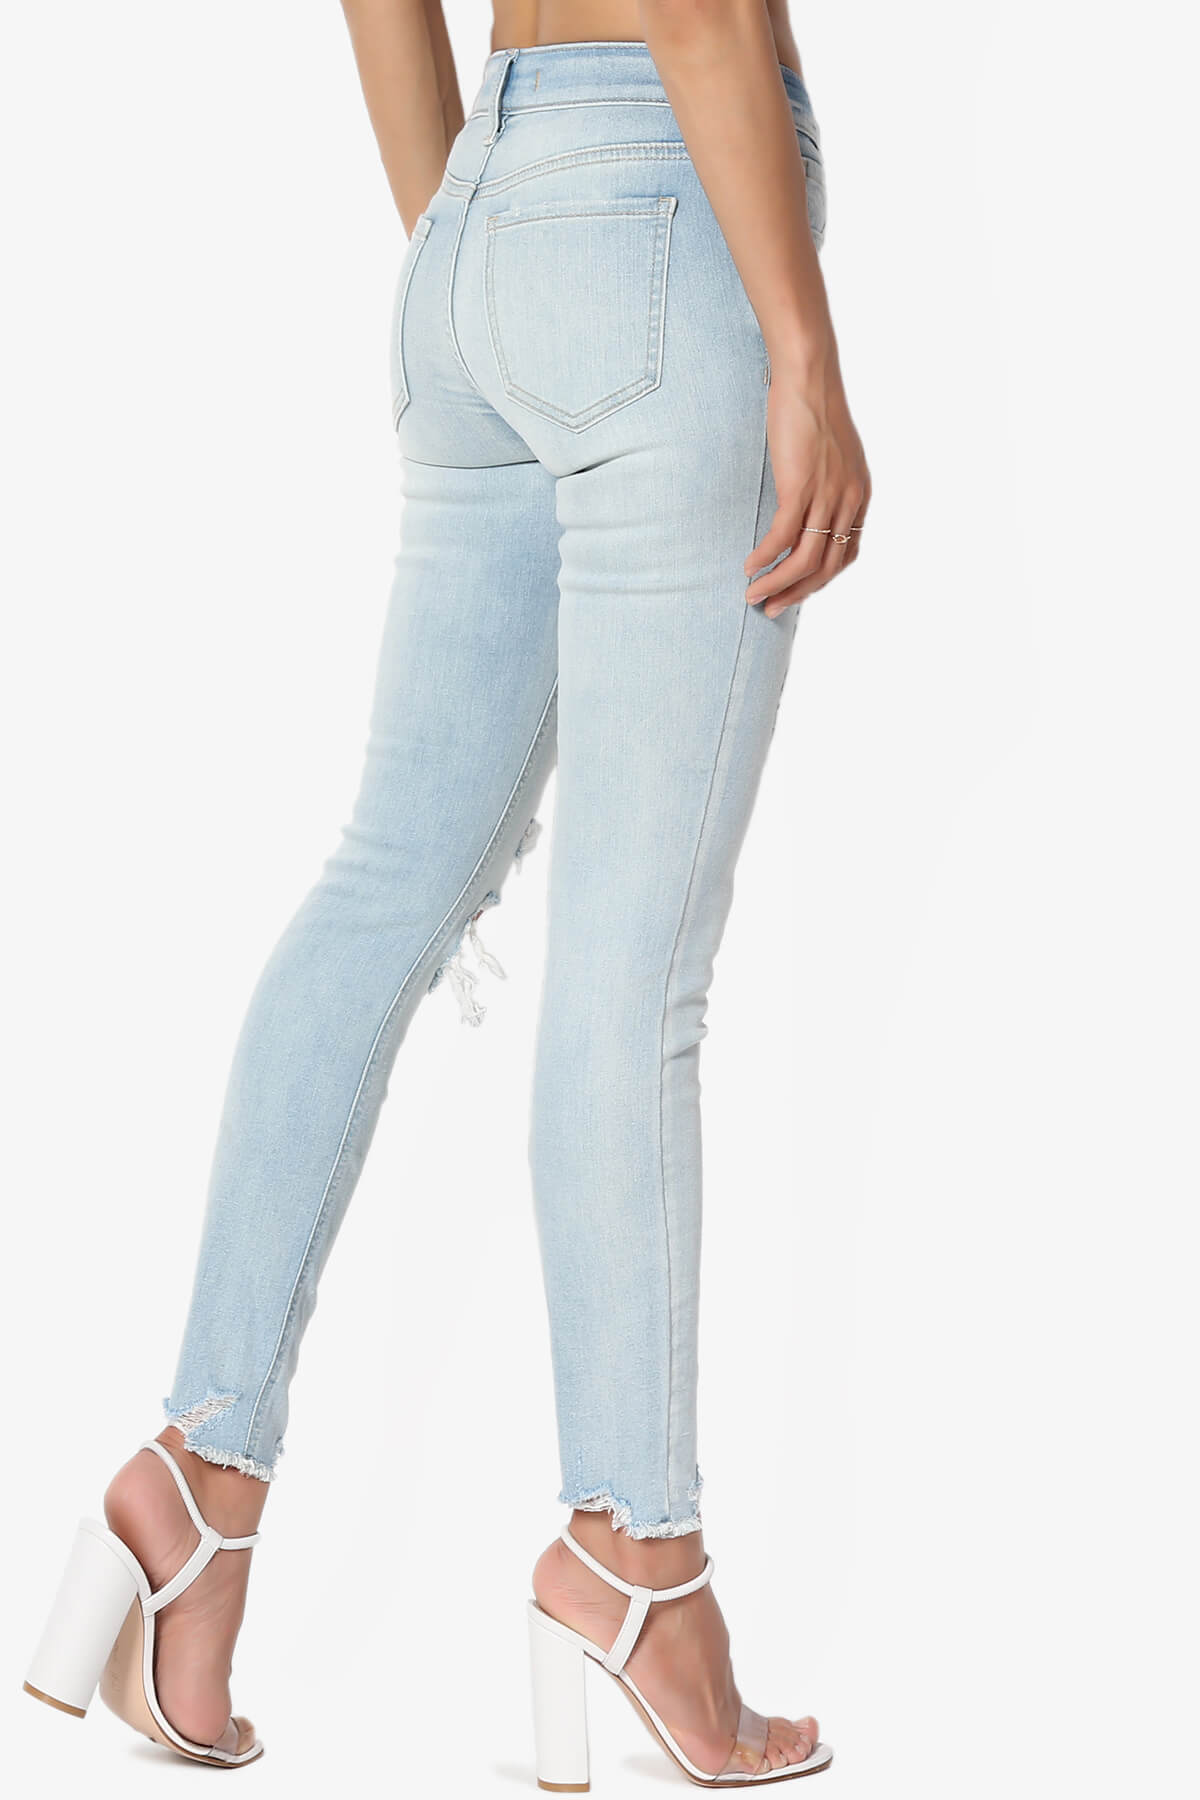 Josie Mid Rise Skinny Jeans in Cold Blooded LT LIGHT_4